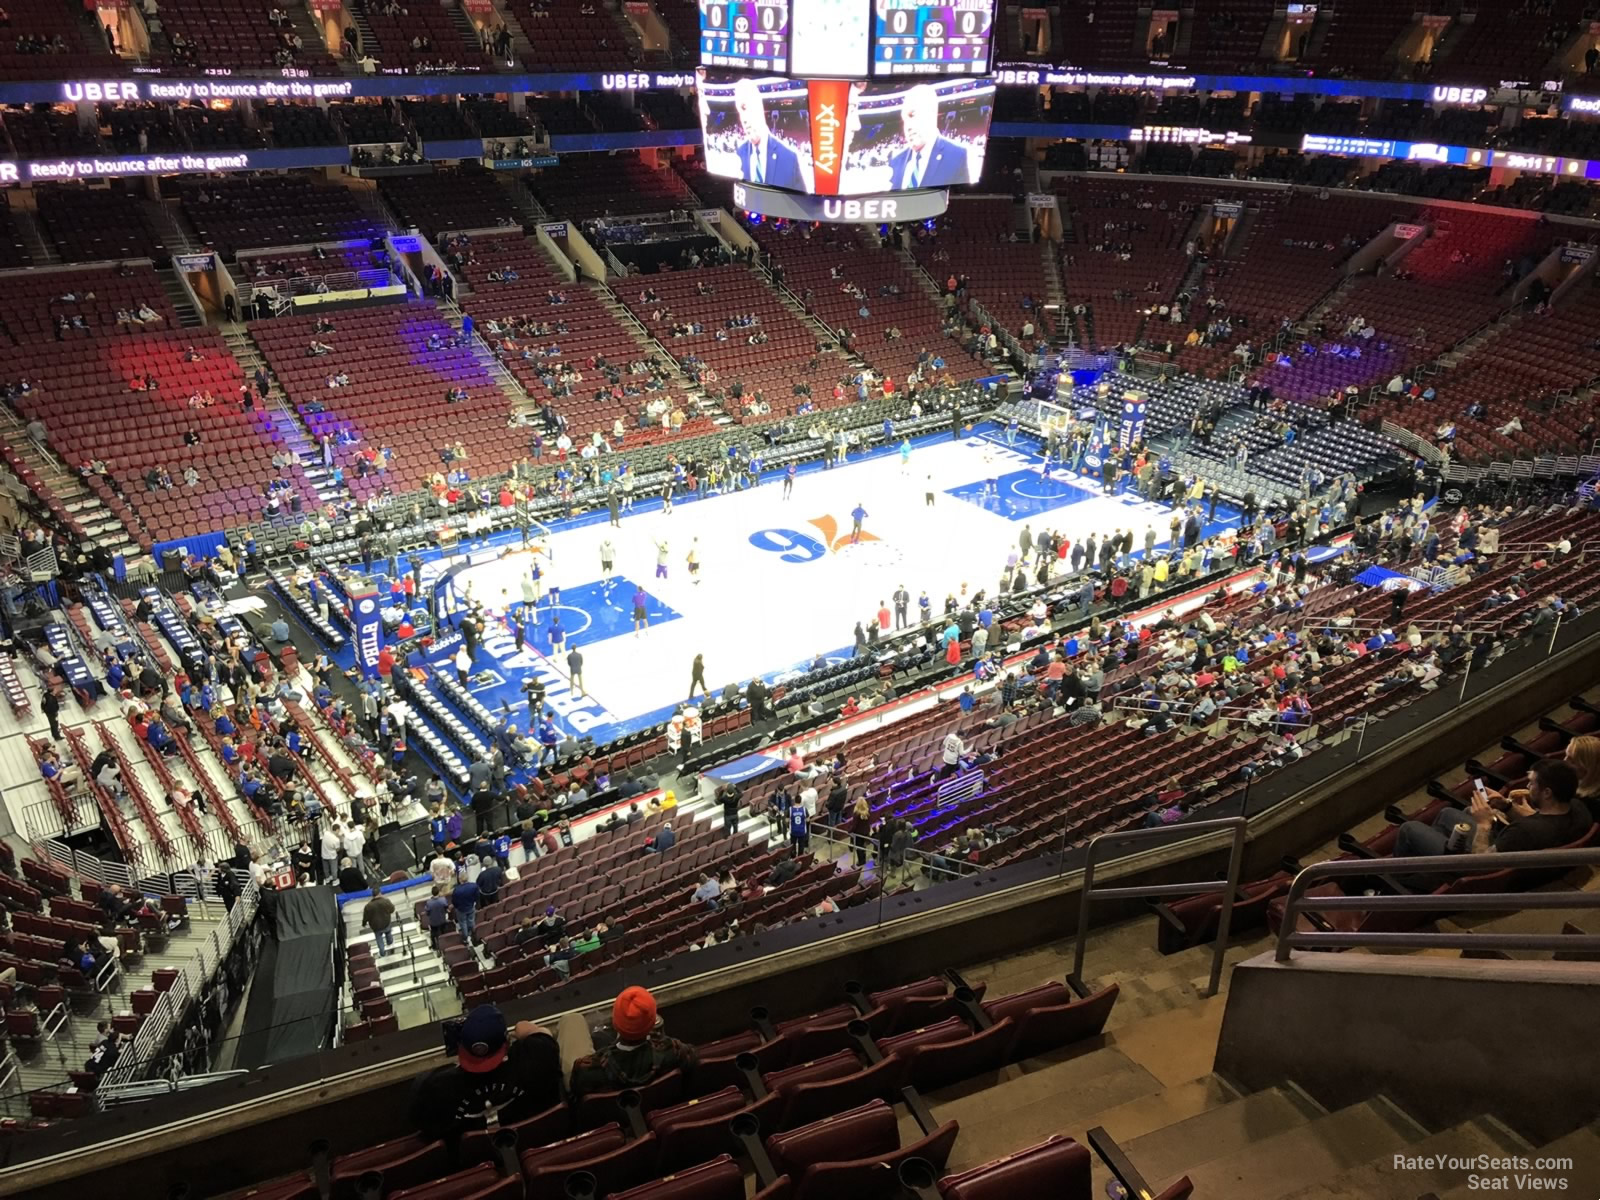 section 222a, row 7 seat view  for basketball - wells fargo center